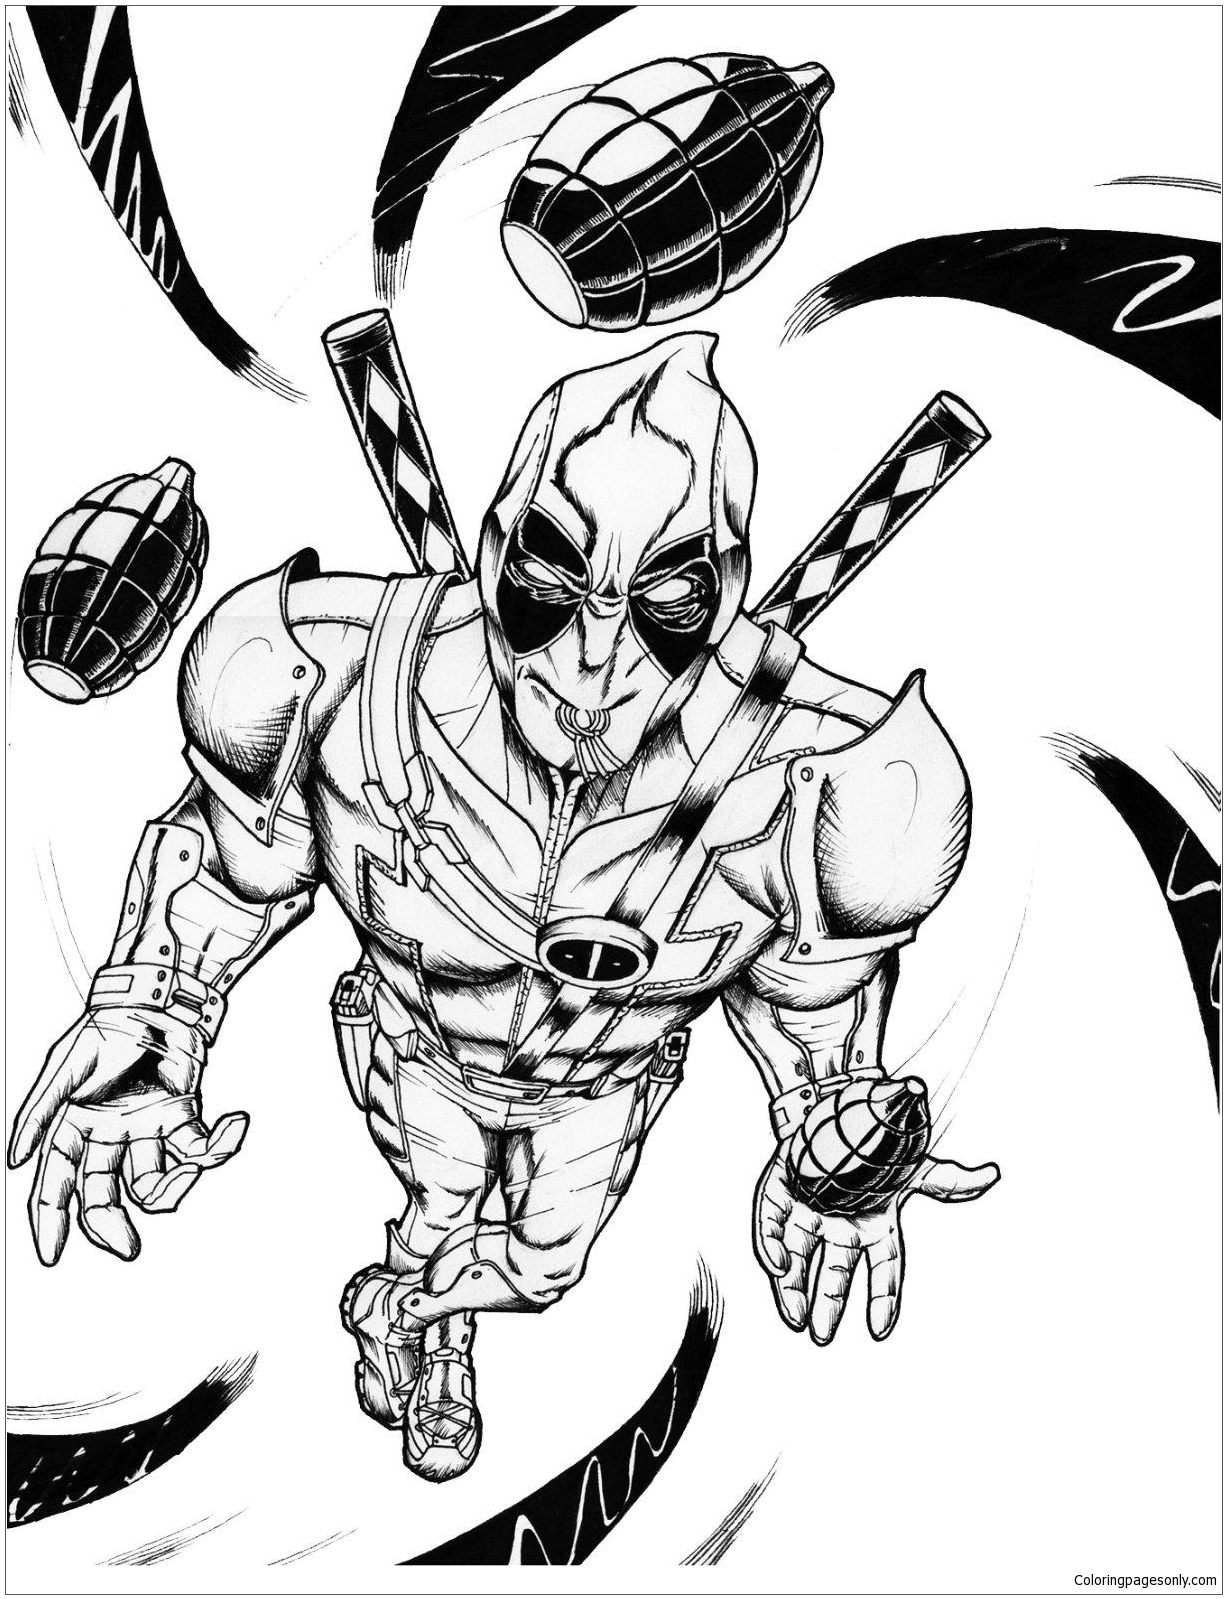 Download Deadpool Online 9 Coloring Page - Free Coloring Pages Online